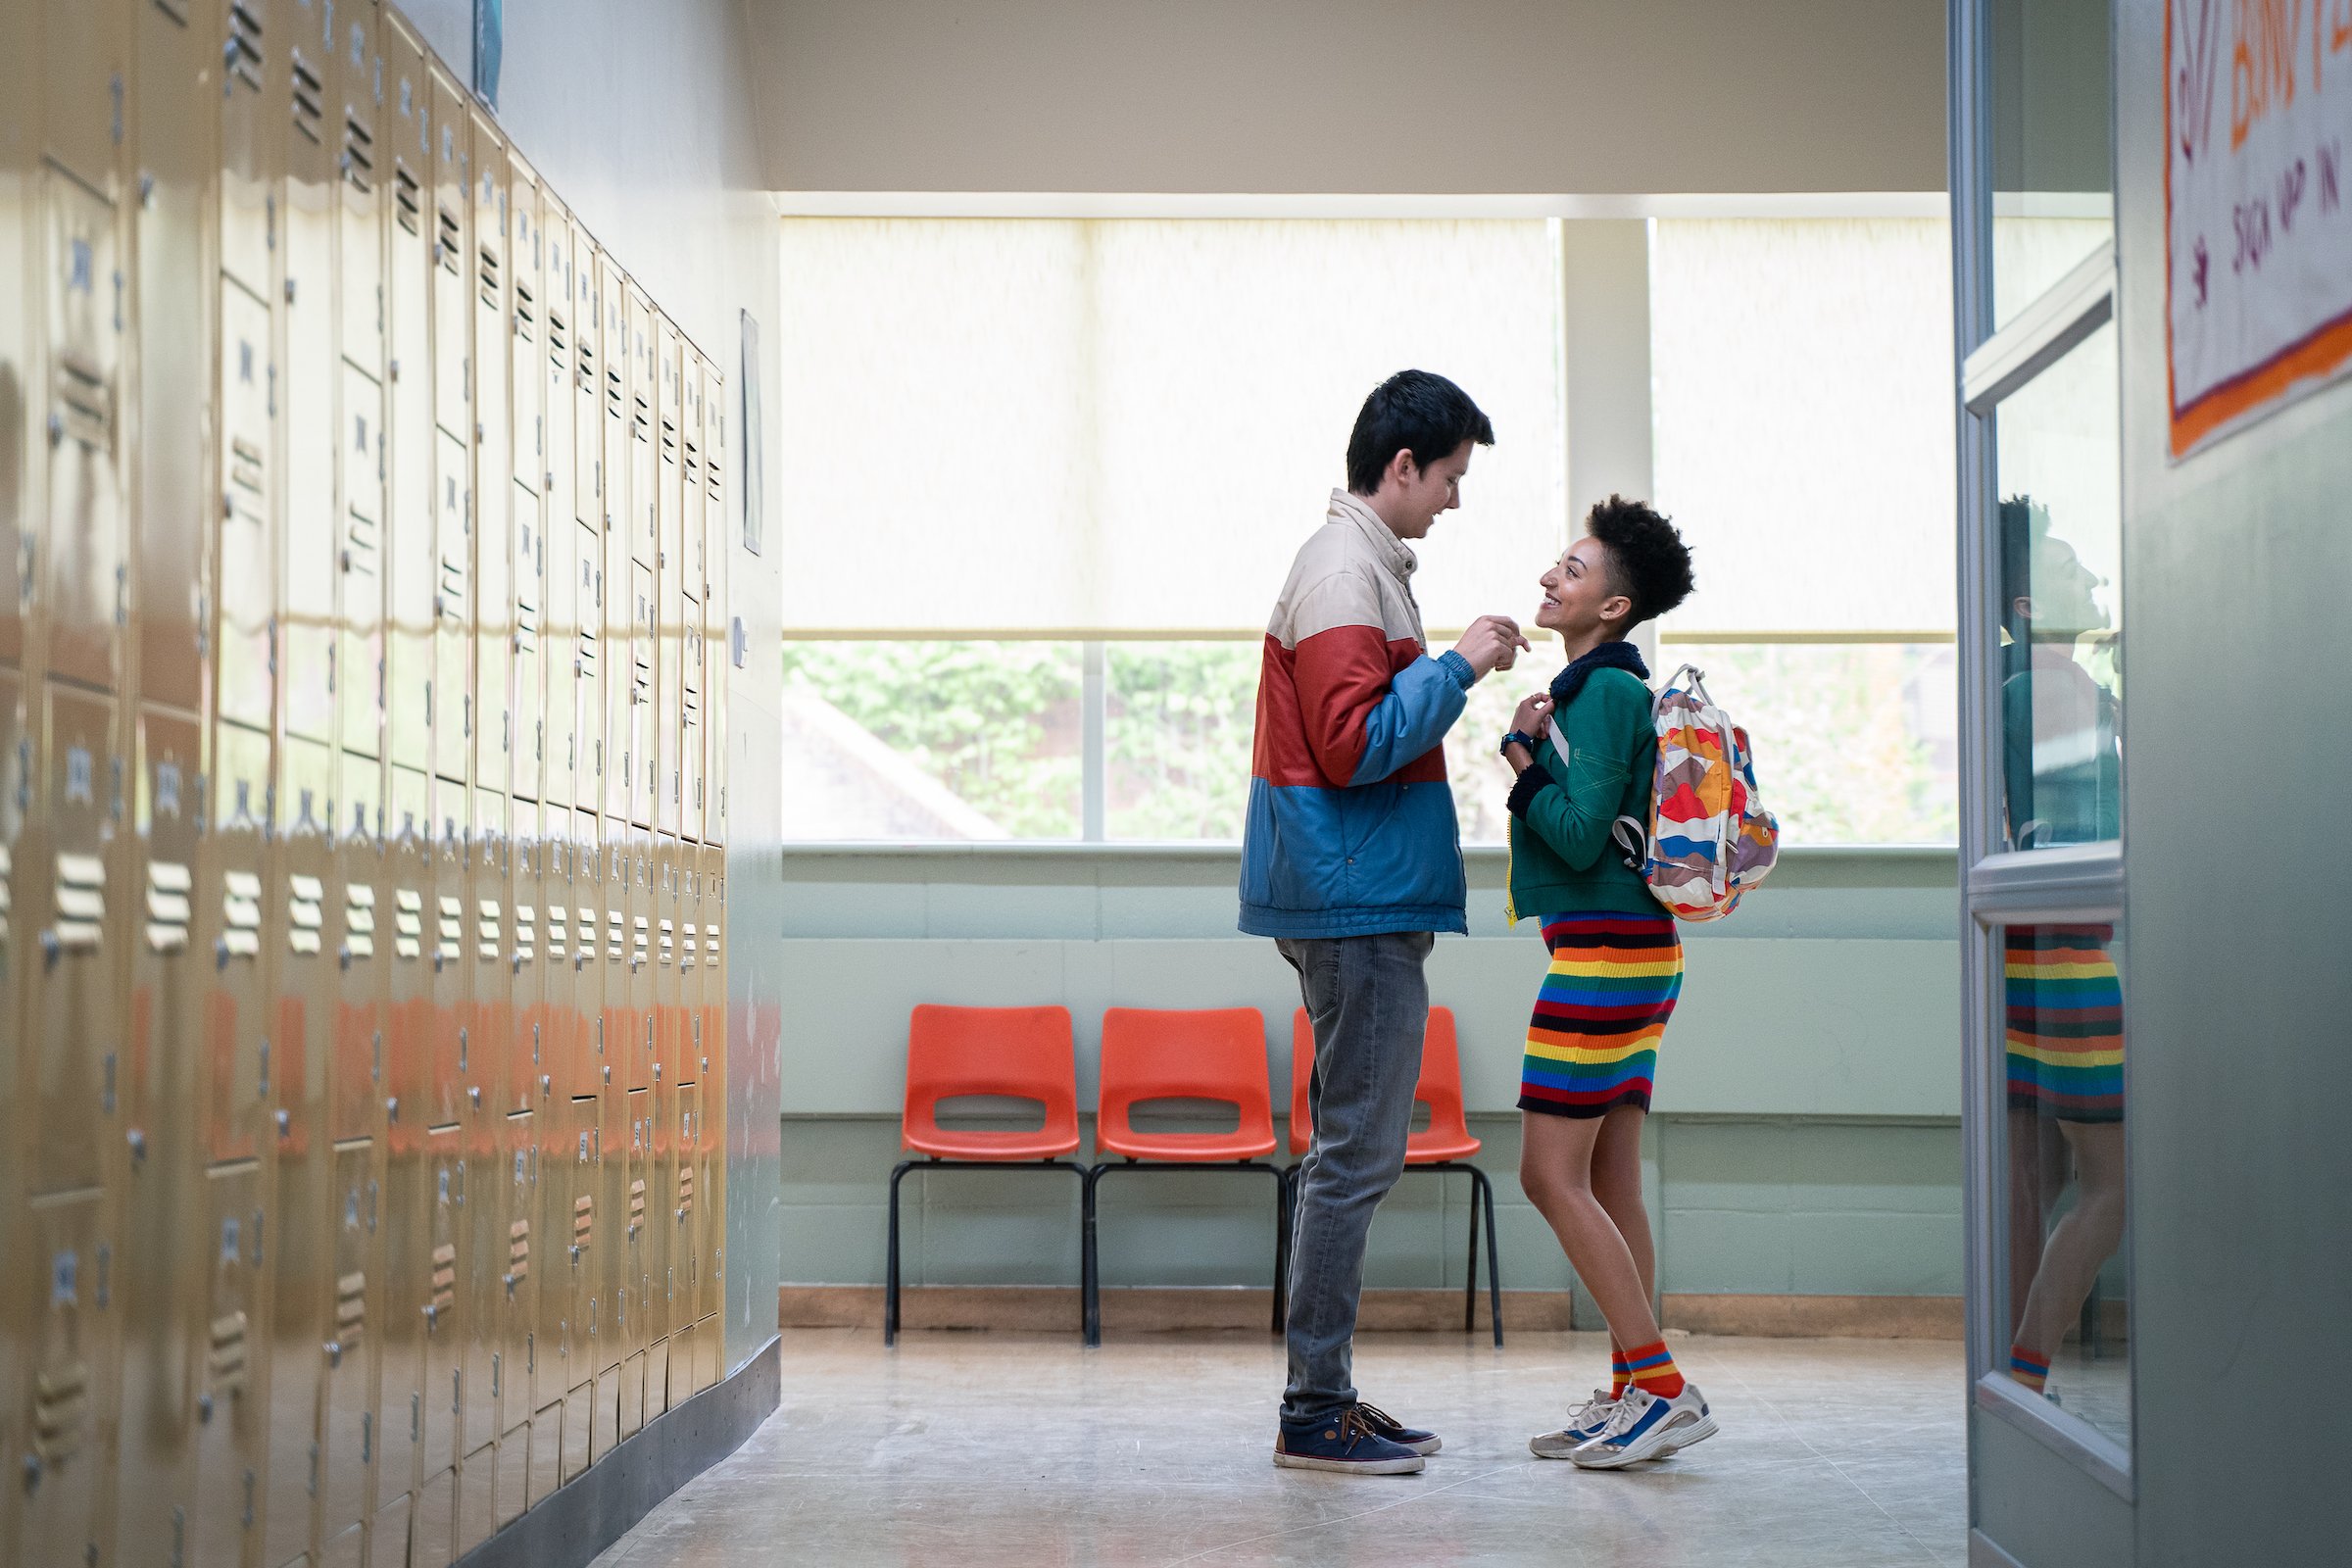 Asa Butterfield and Patricia Allison in 'Sex Education'